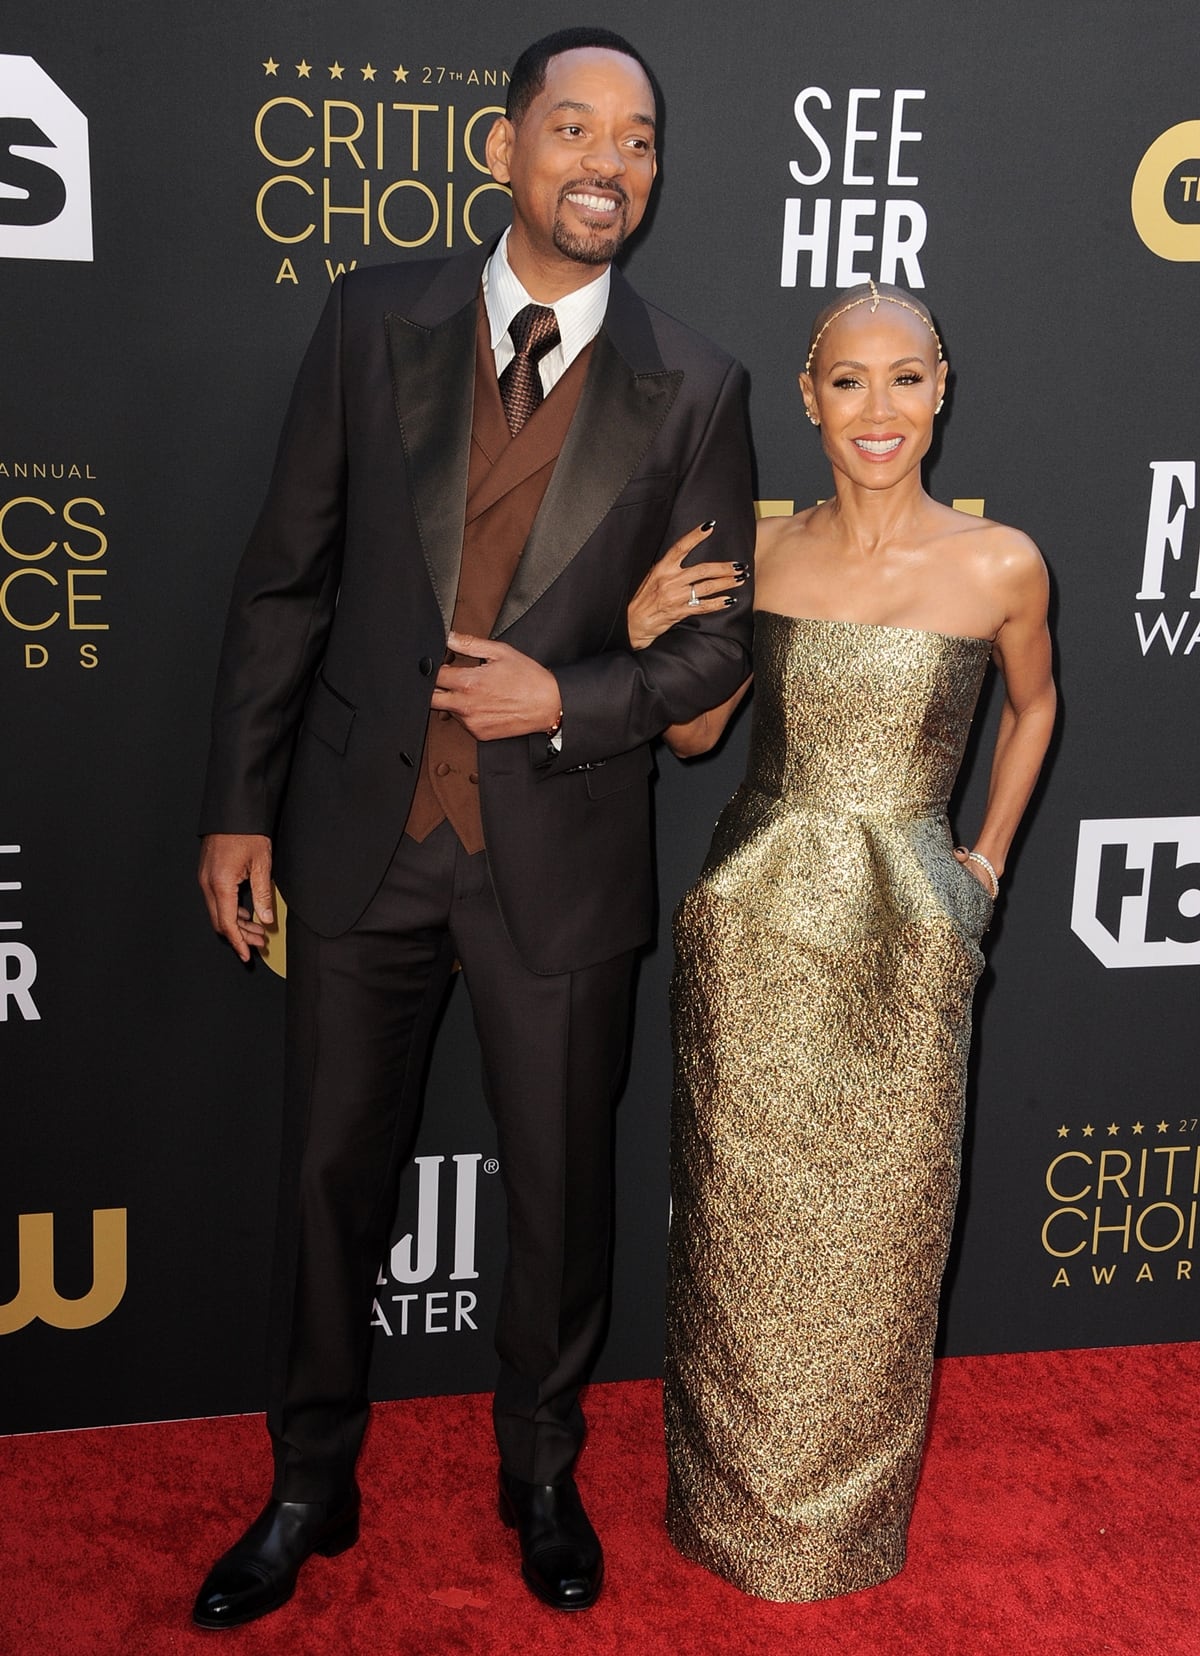 Will Smith and his wife Jada Pinkett Smith, who wore a gold strapless dress and a diamond headpiece by Jacquie Aiche, at the 27th annual Critics Choice Awards